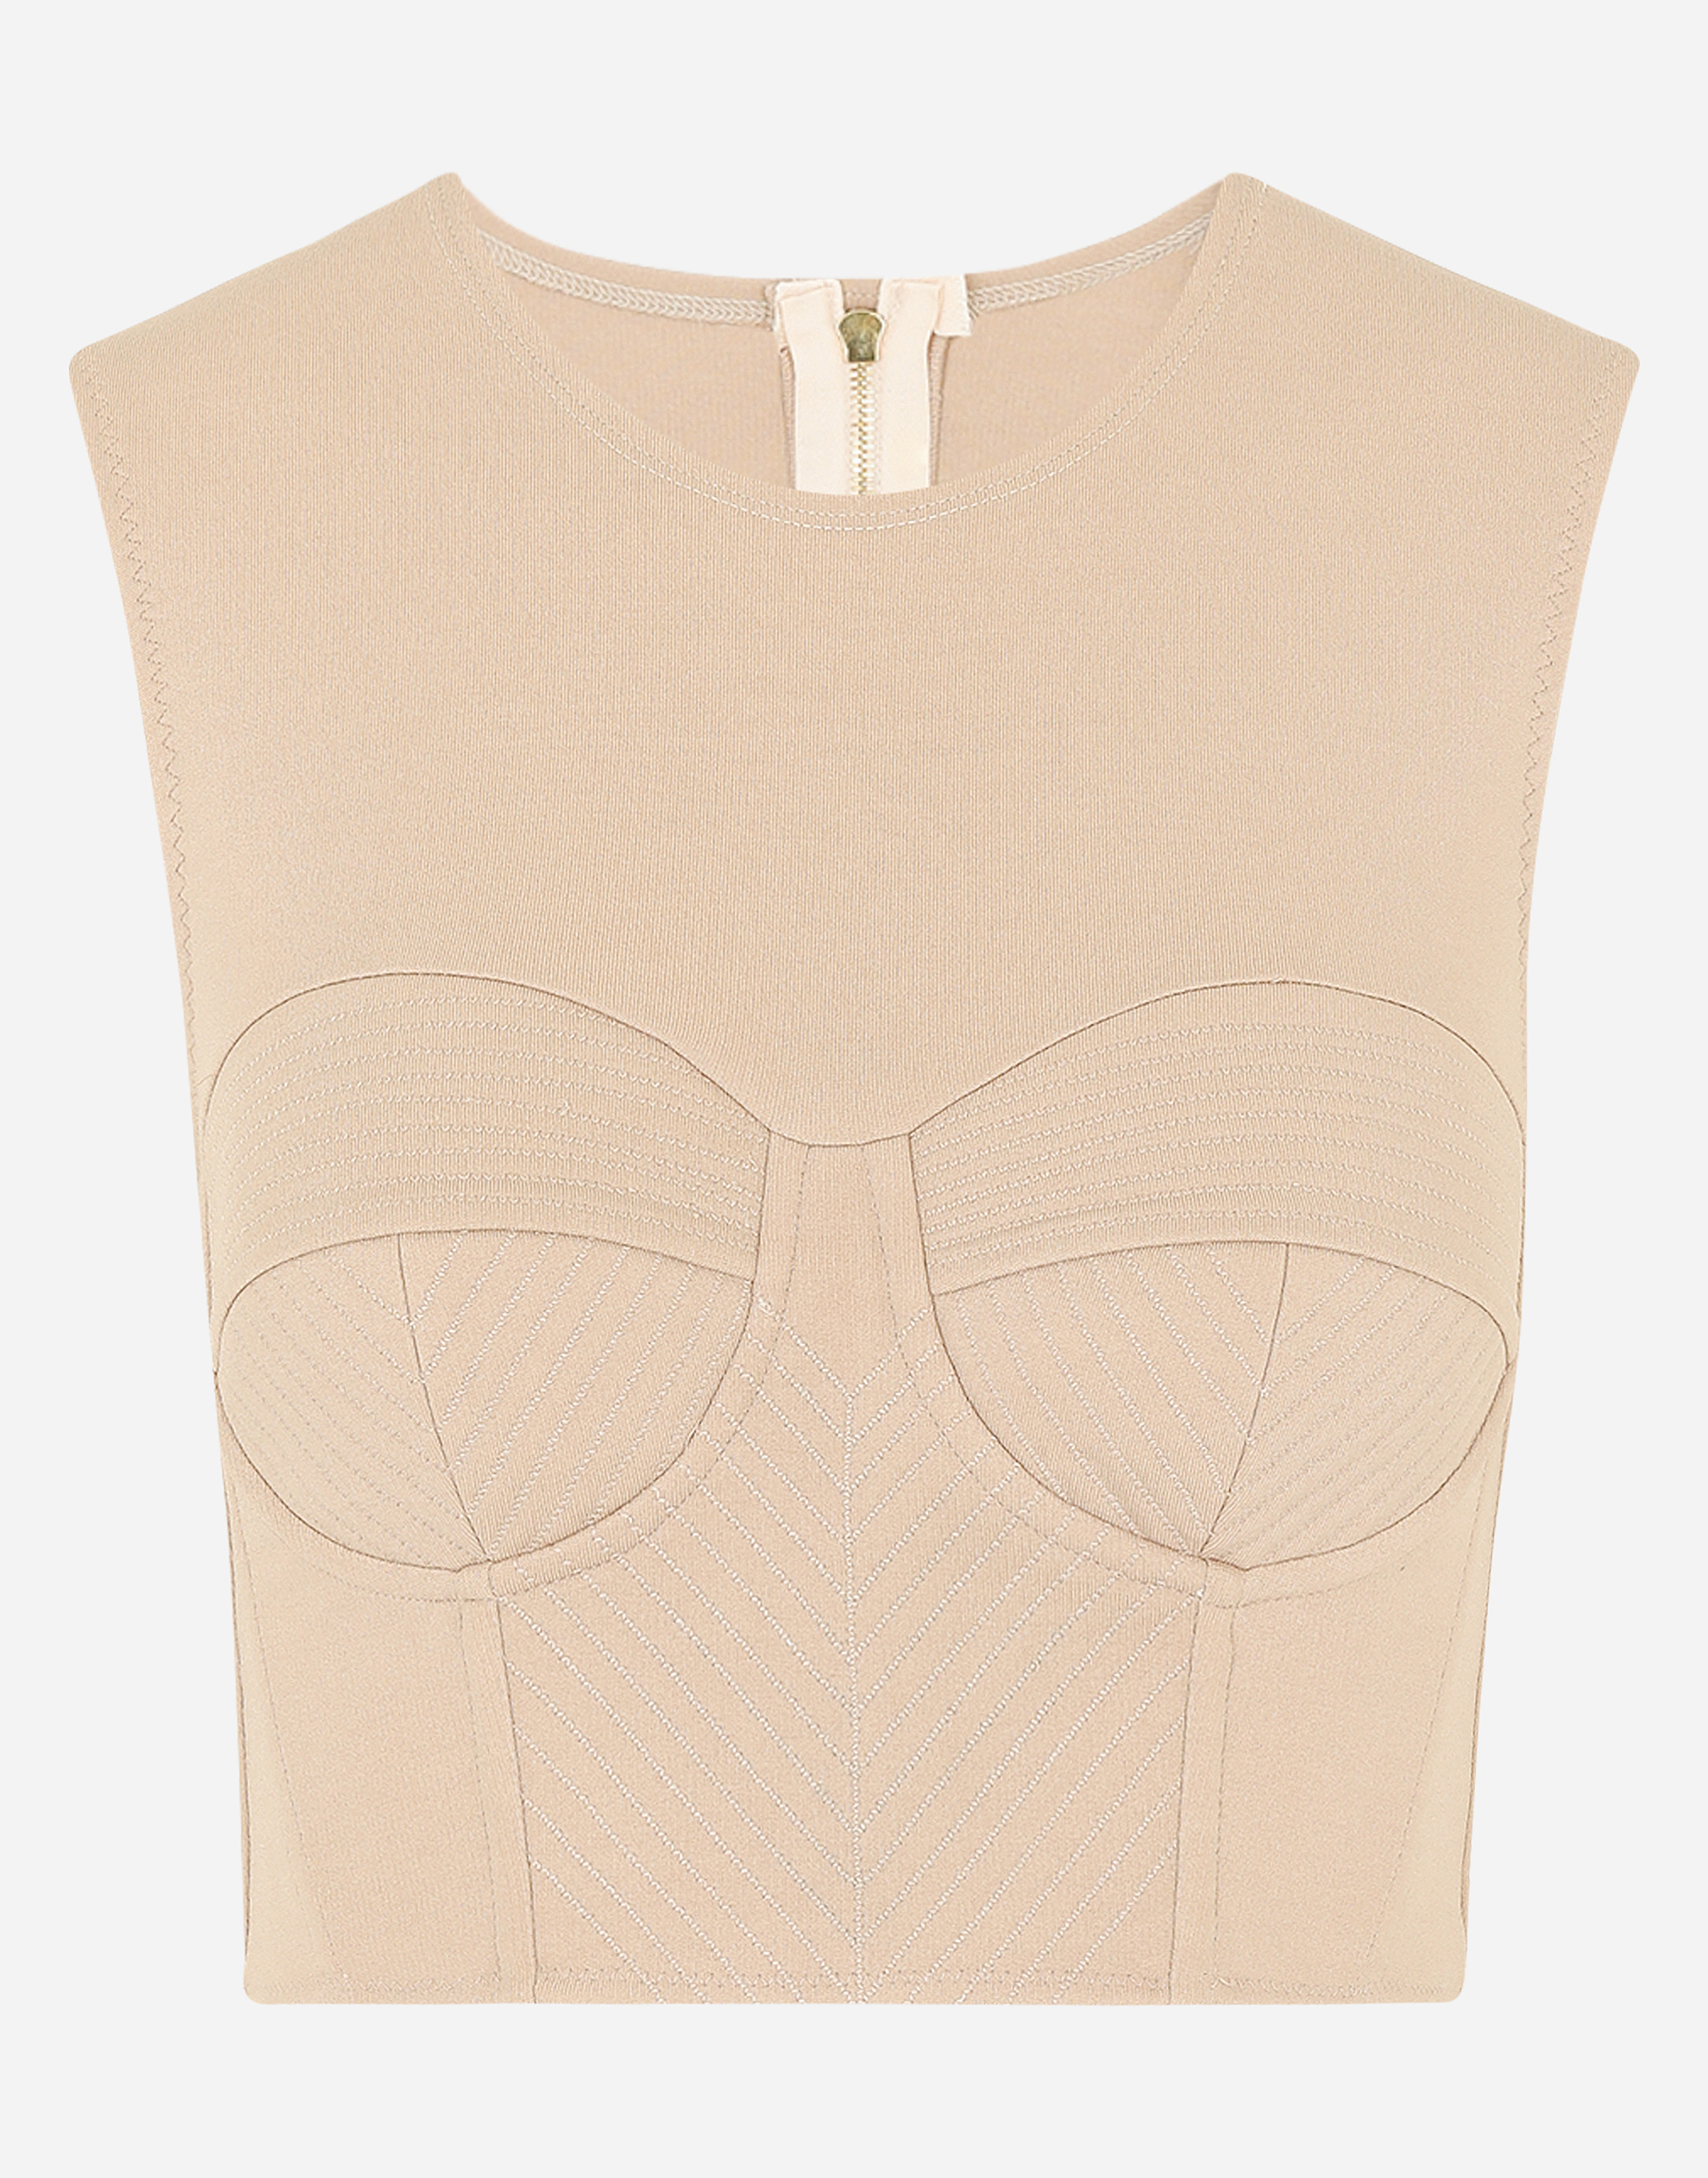 Sleeveless jersey top with corset details in Beige